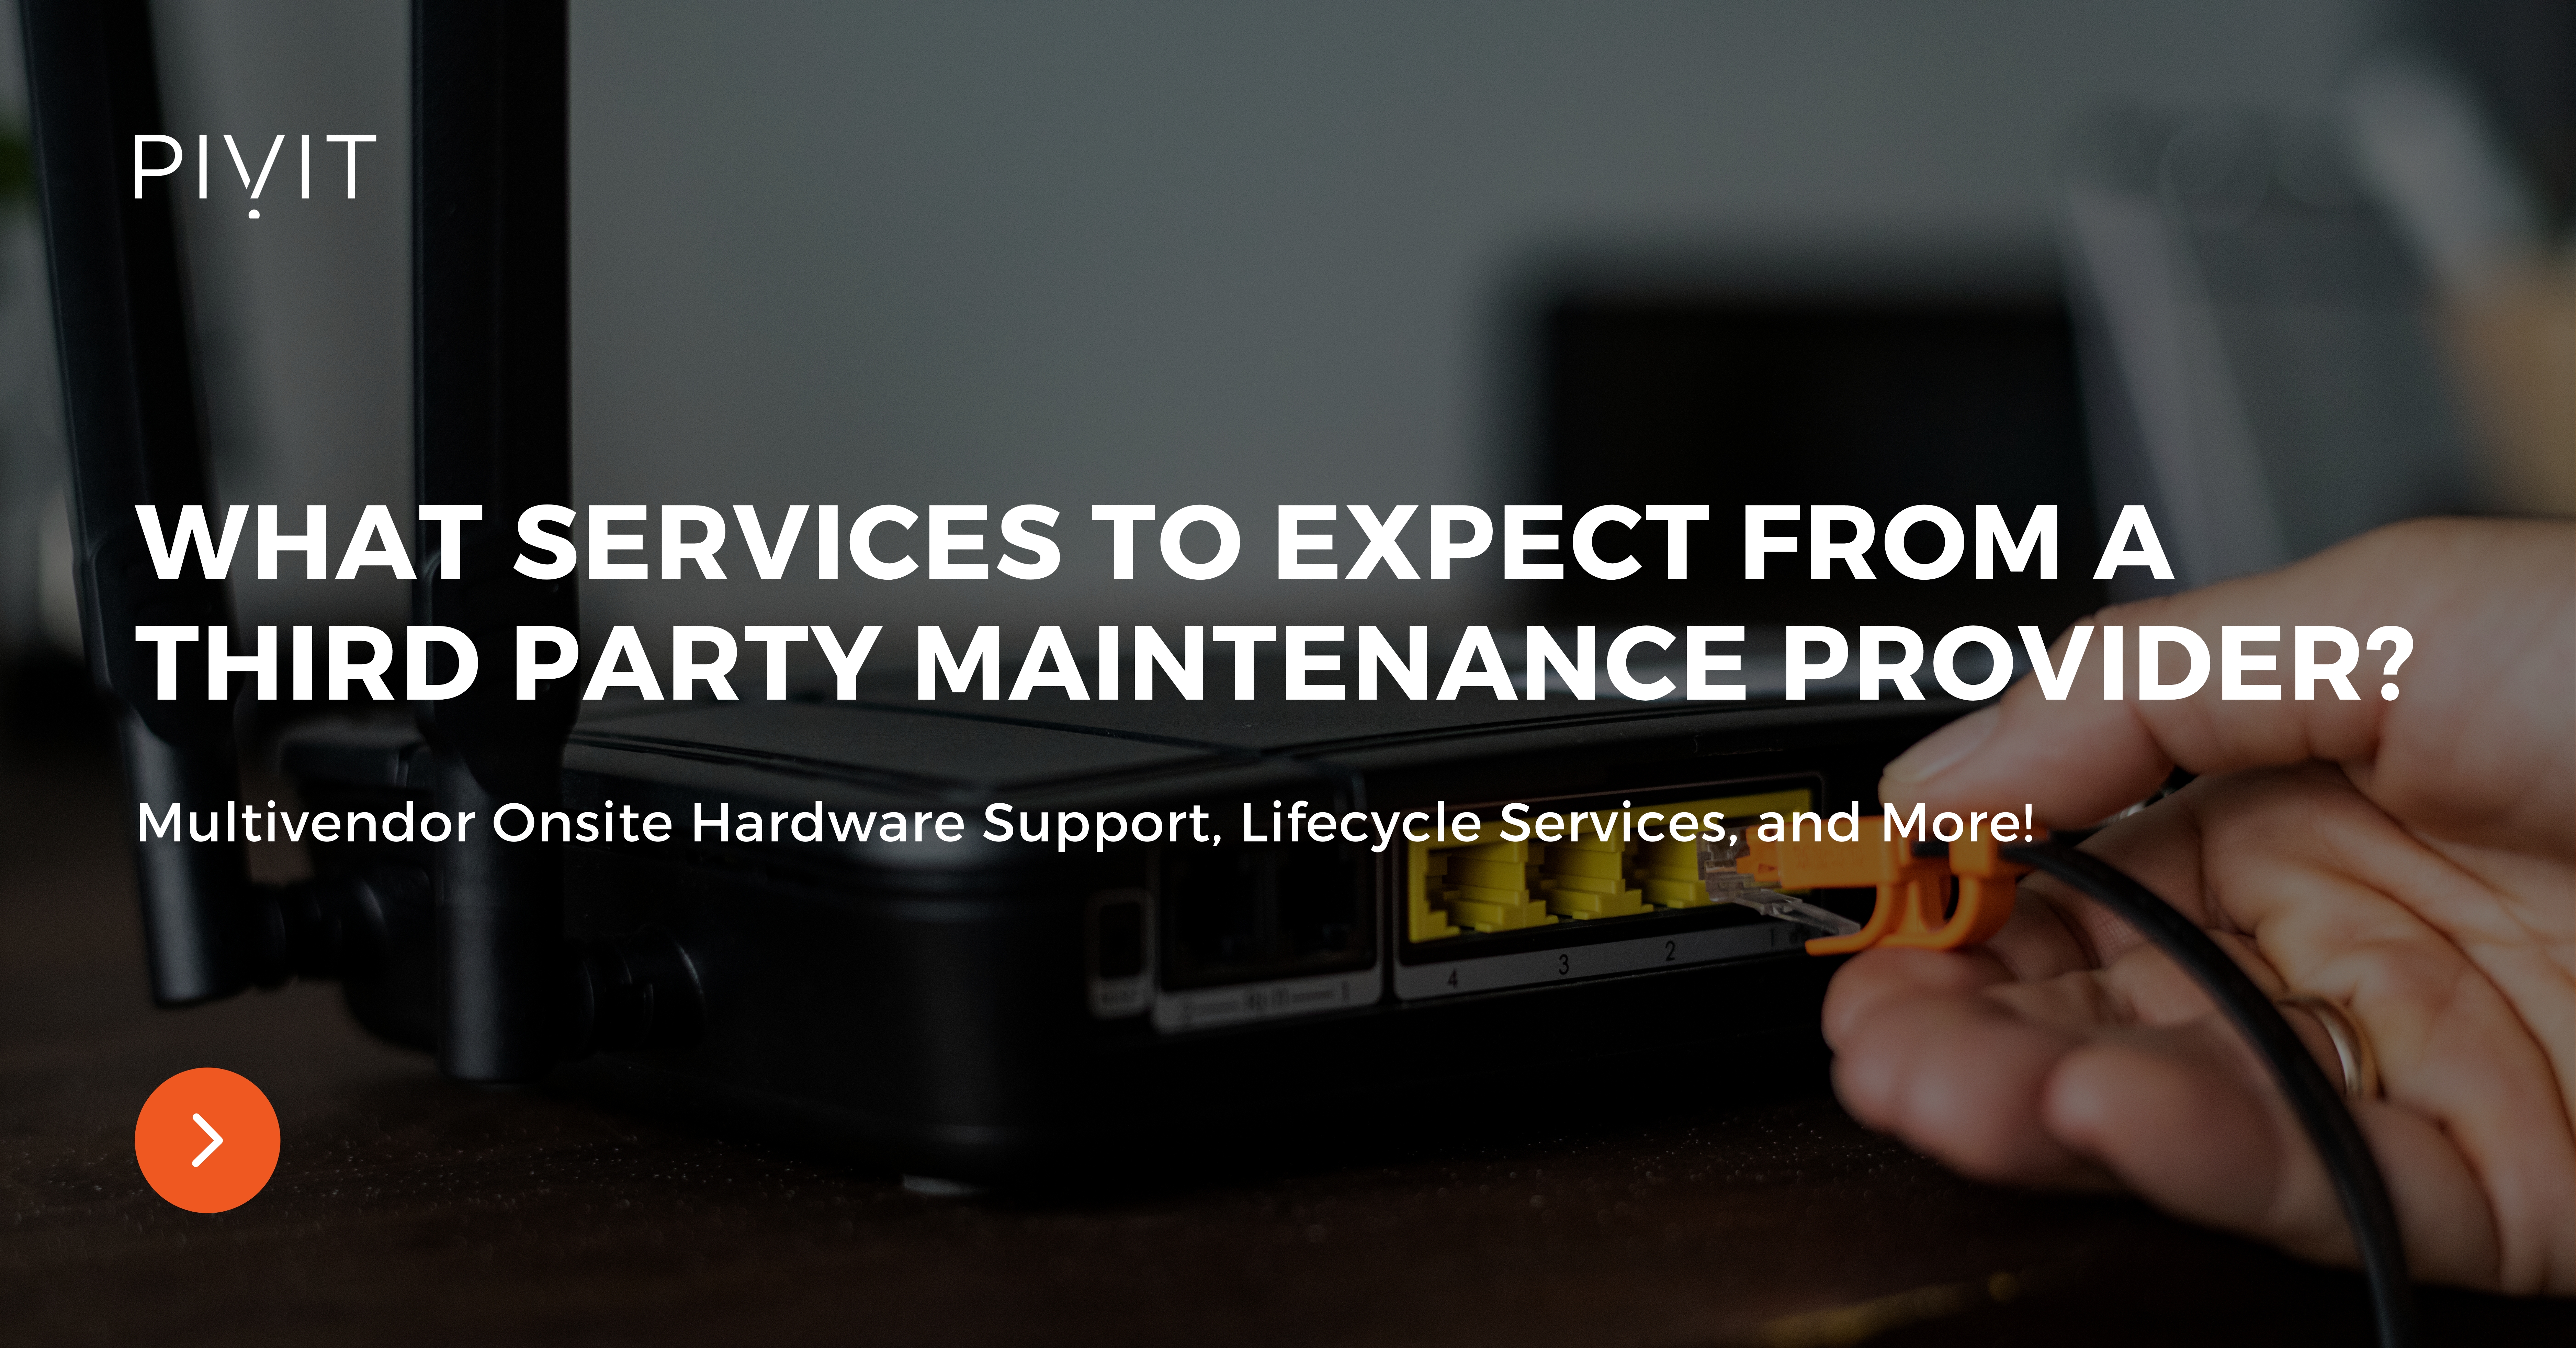 What Services to Expect from a Third Party Maintenance Provider